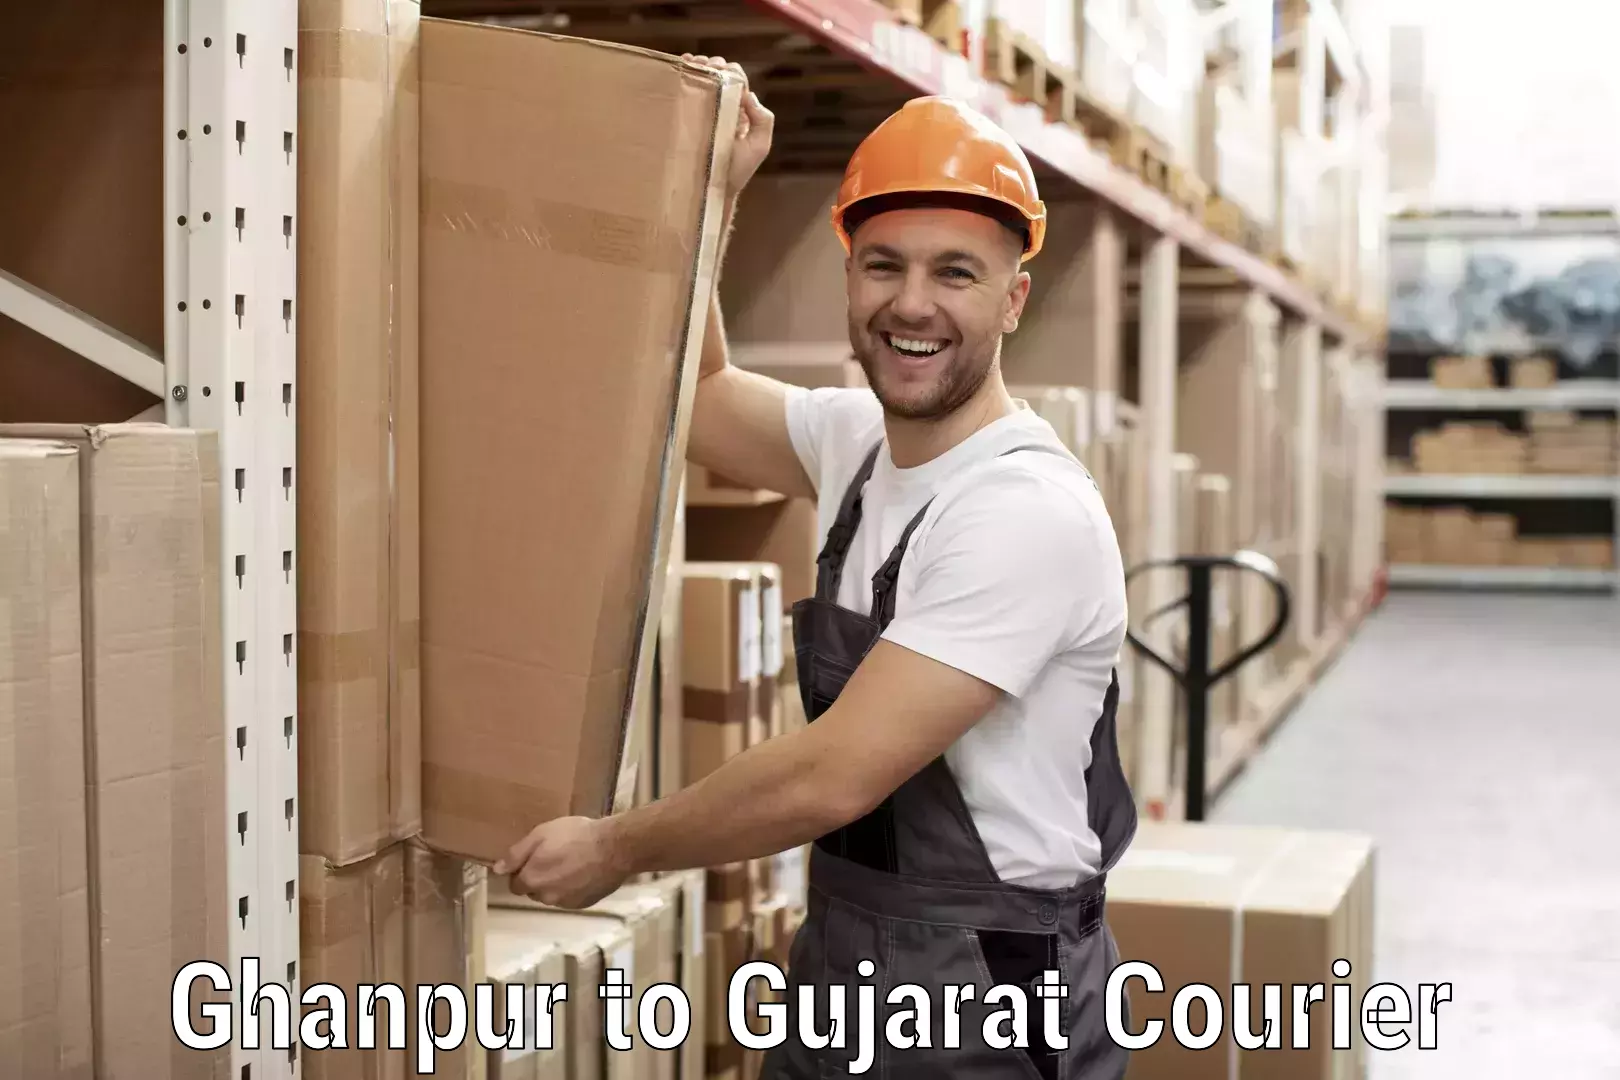 On-call courier service Ghanpur to Dholera